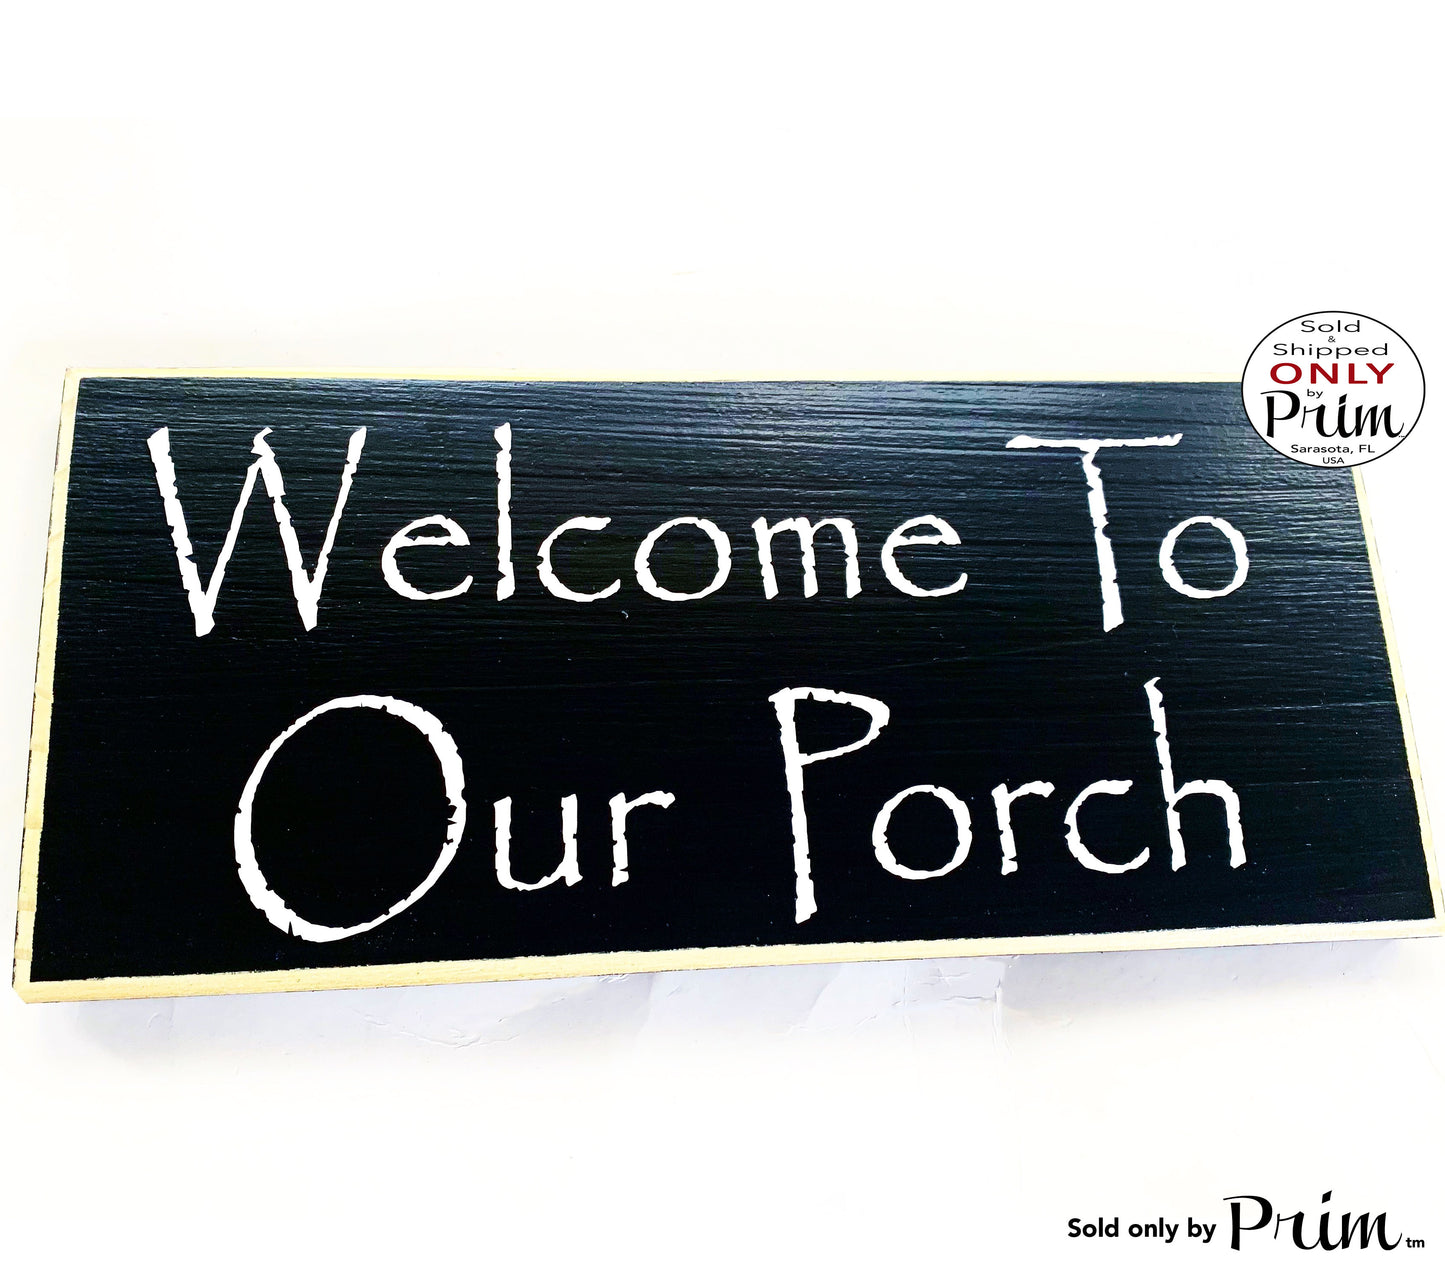 12x6 Welcome To Our Porch Custom Wood Sign Welcome Outside Garden Patio Lanai Welcome Home Porch Living Wall Plaque 